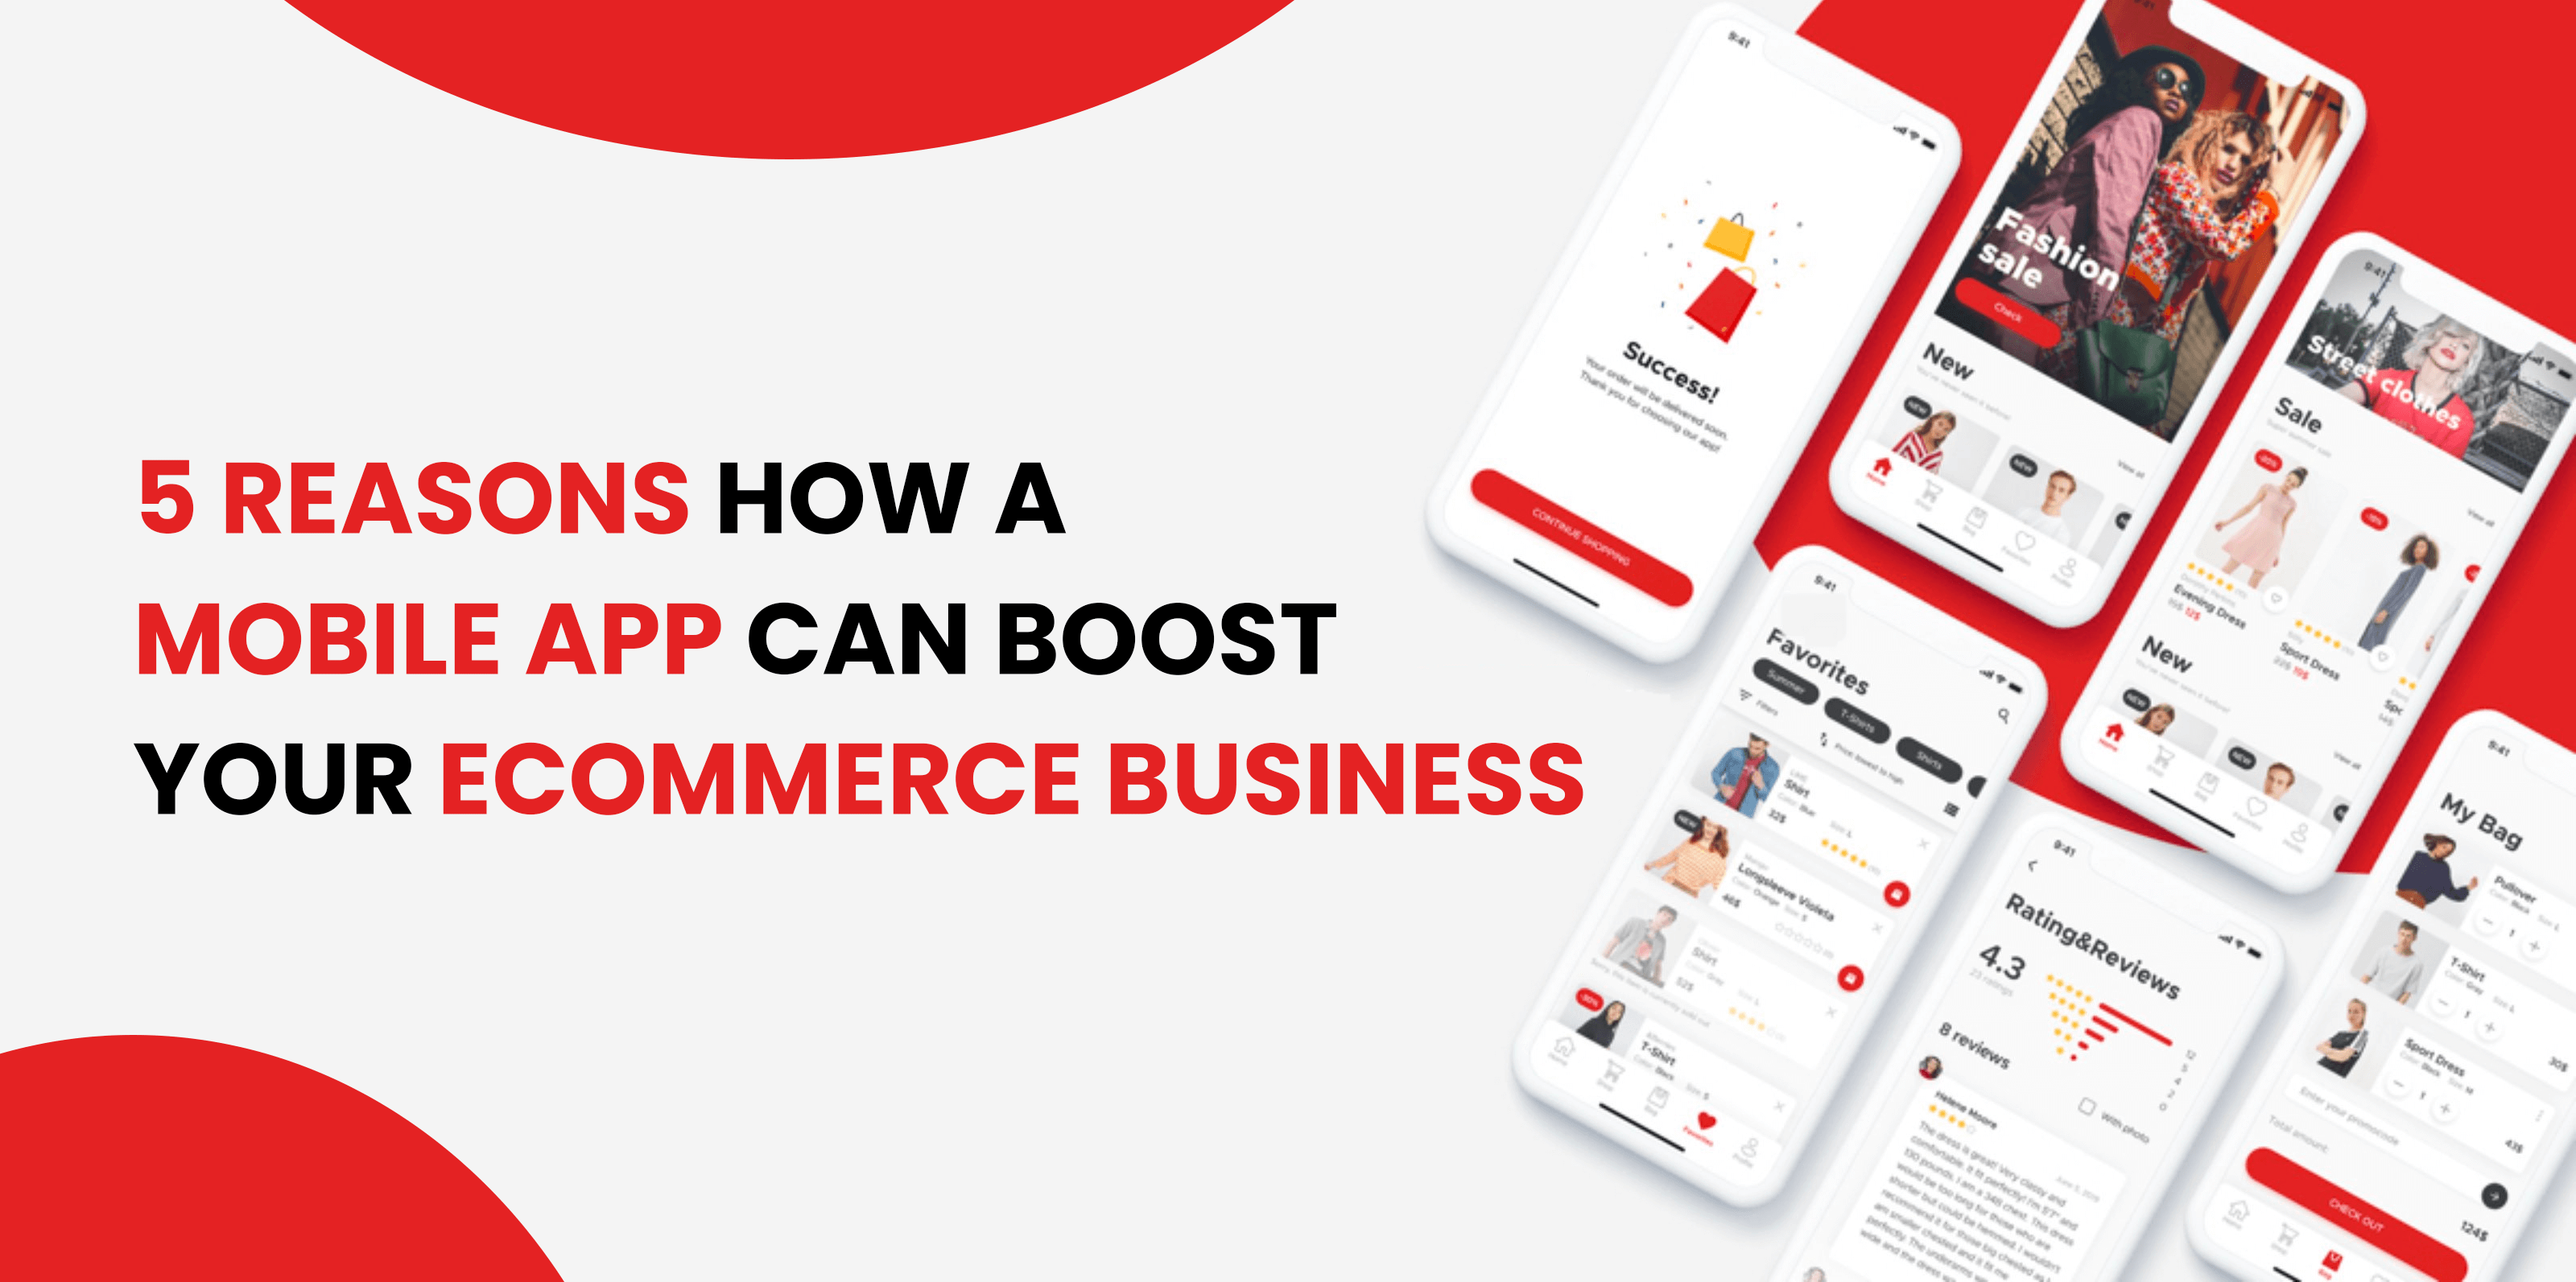  5-reasons-how-a-mobile-app-can-boost-your-eCommerce-business